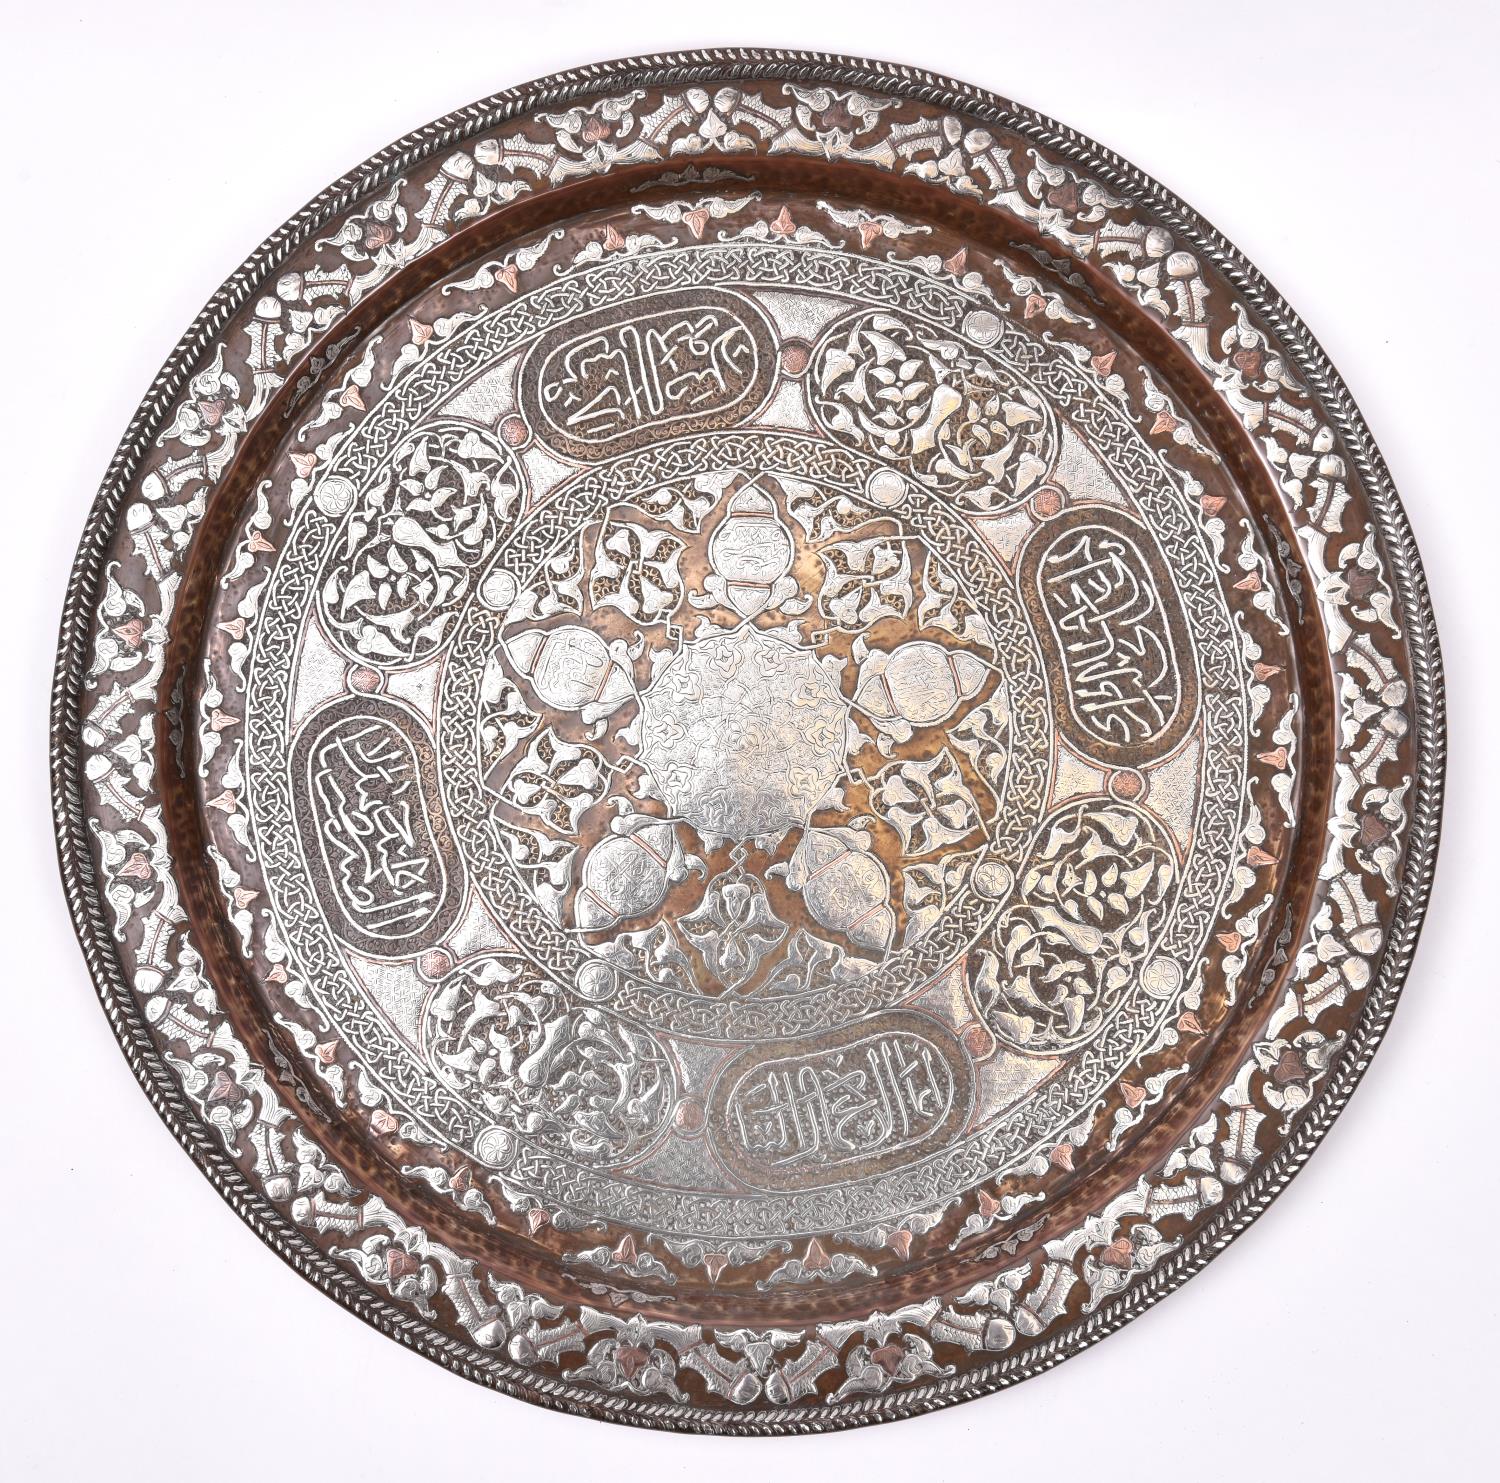 A large 19th Century Cairoware tray set. Of possibly Egypt, Morocco or Syria Mamluk origin. - Image 2 of 10